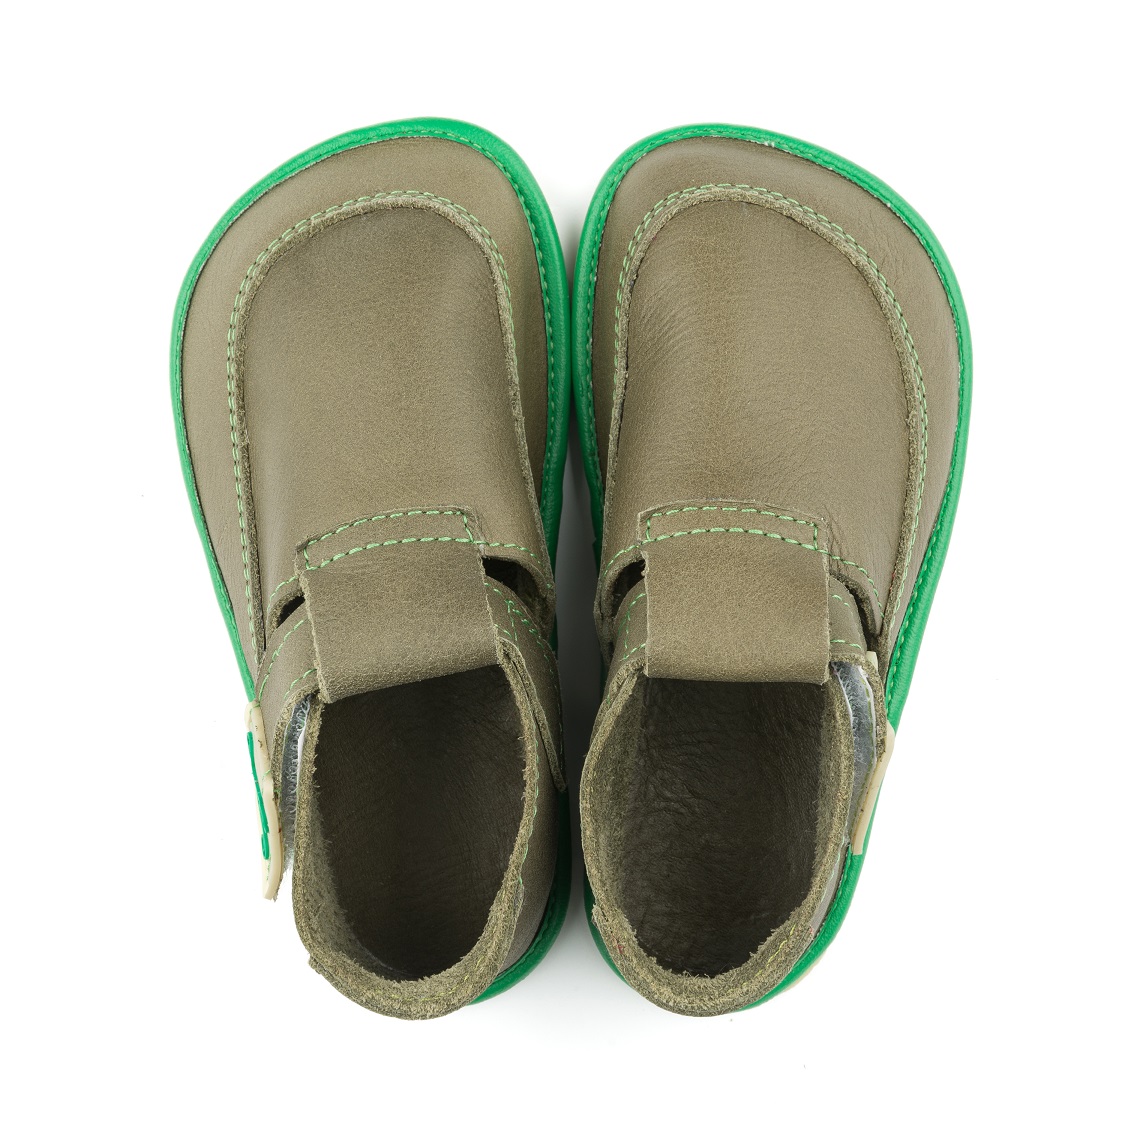 Coco Barefoot Shoes for Kids